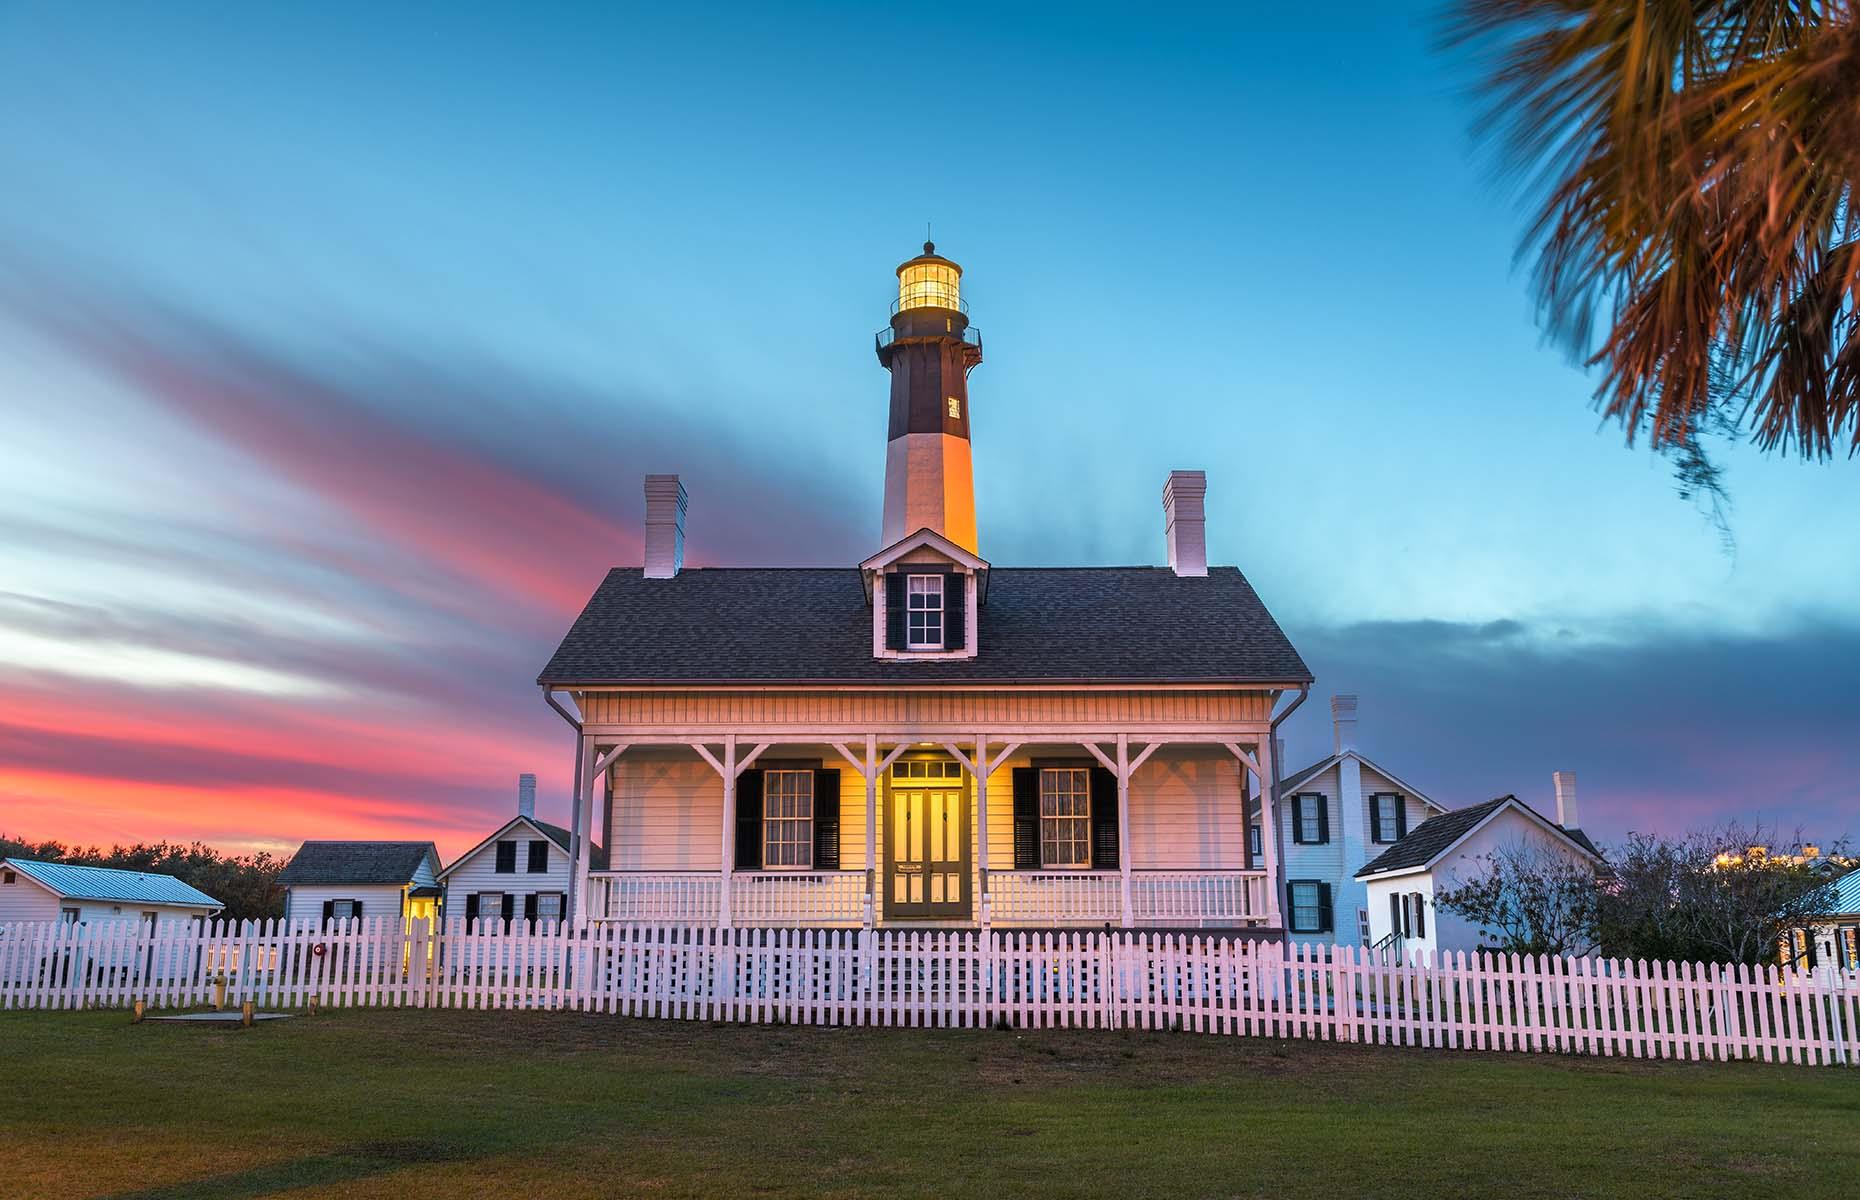 <p>A favorite weekend spot for Savannah locals, the nearby Tybee Island is one of the best family getaways in Georgia. It's home to <a href="https://visittybee.com/article/fort-screven-history">Fort Screven</a>, which features 19th-century gun batteries, an 18th-century lighthouse and, of course, stretches of white-sand beach. Once you've soaked up the local history, had a comforting meal in one of the classic mom-and-pop diners and explored the South Beach's pier and pavilion, it's back to relaxing on the pristine, sandy shores.</p>  <p><a href="https://www.loveexploring.com/galleries/108596/americas-oldest-and-most-historic-attractions?page=1"><strong>Discover America's oldest attractions</strong></a></p>